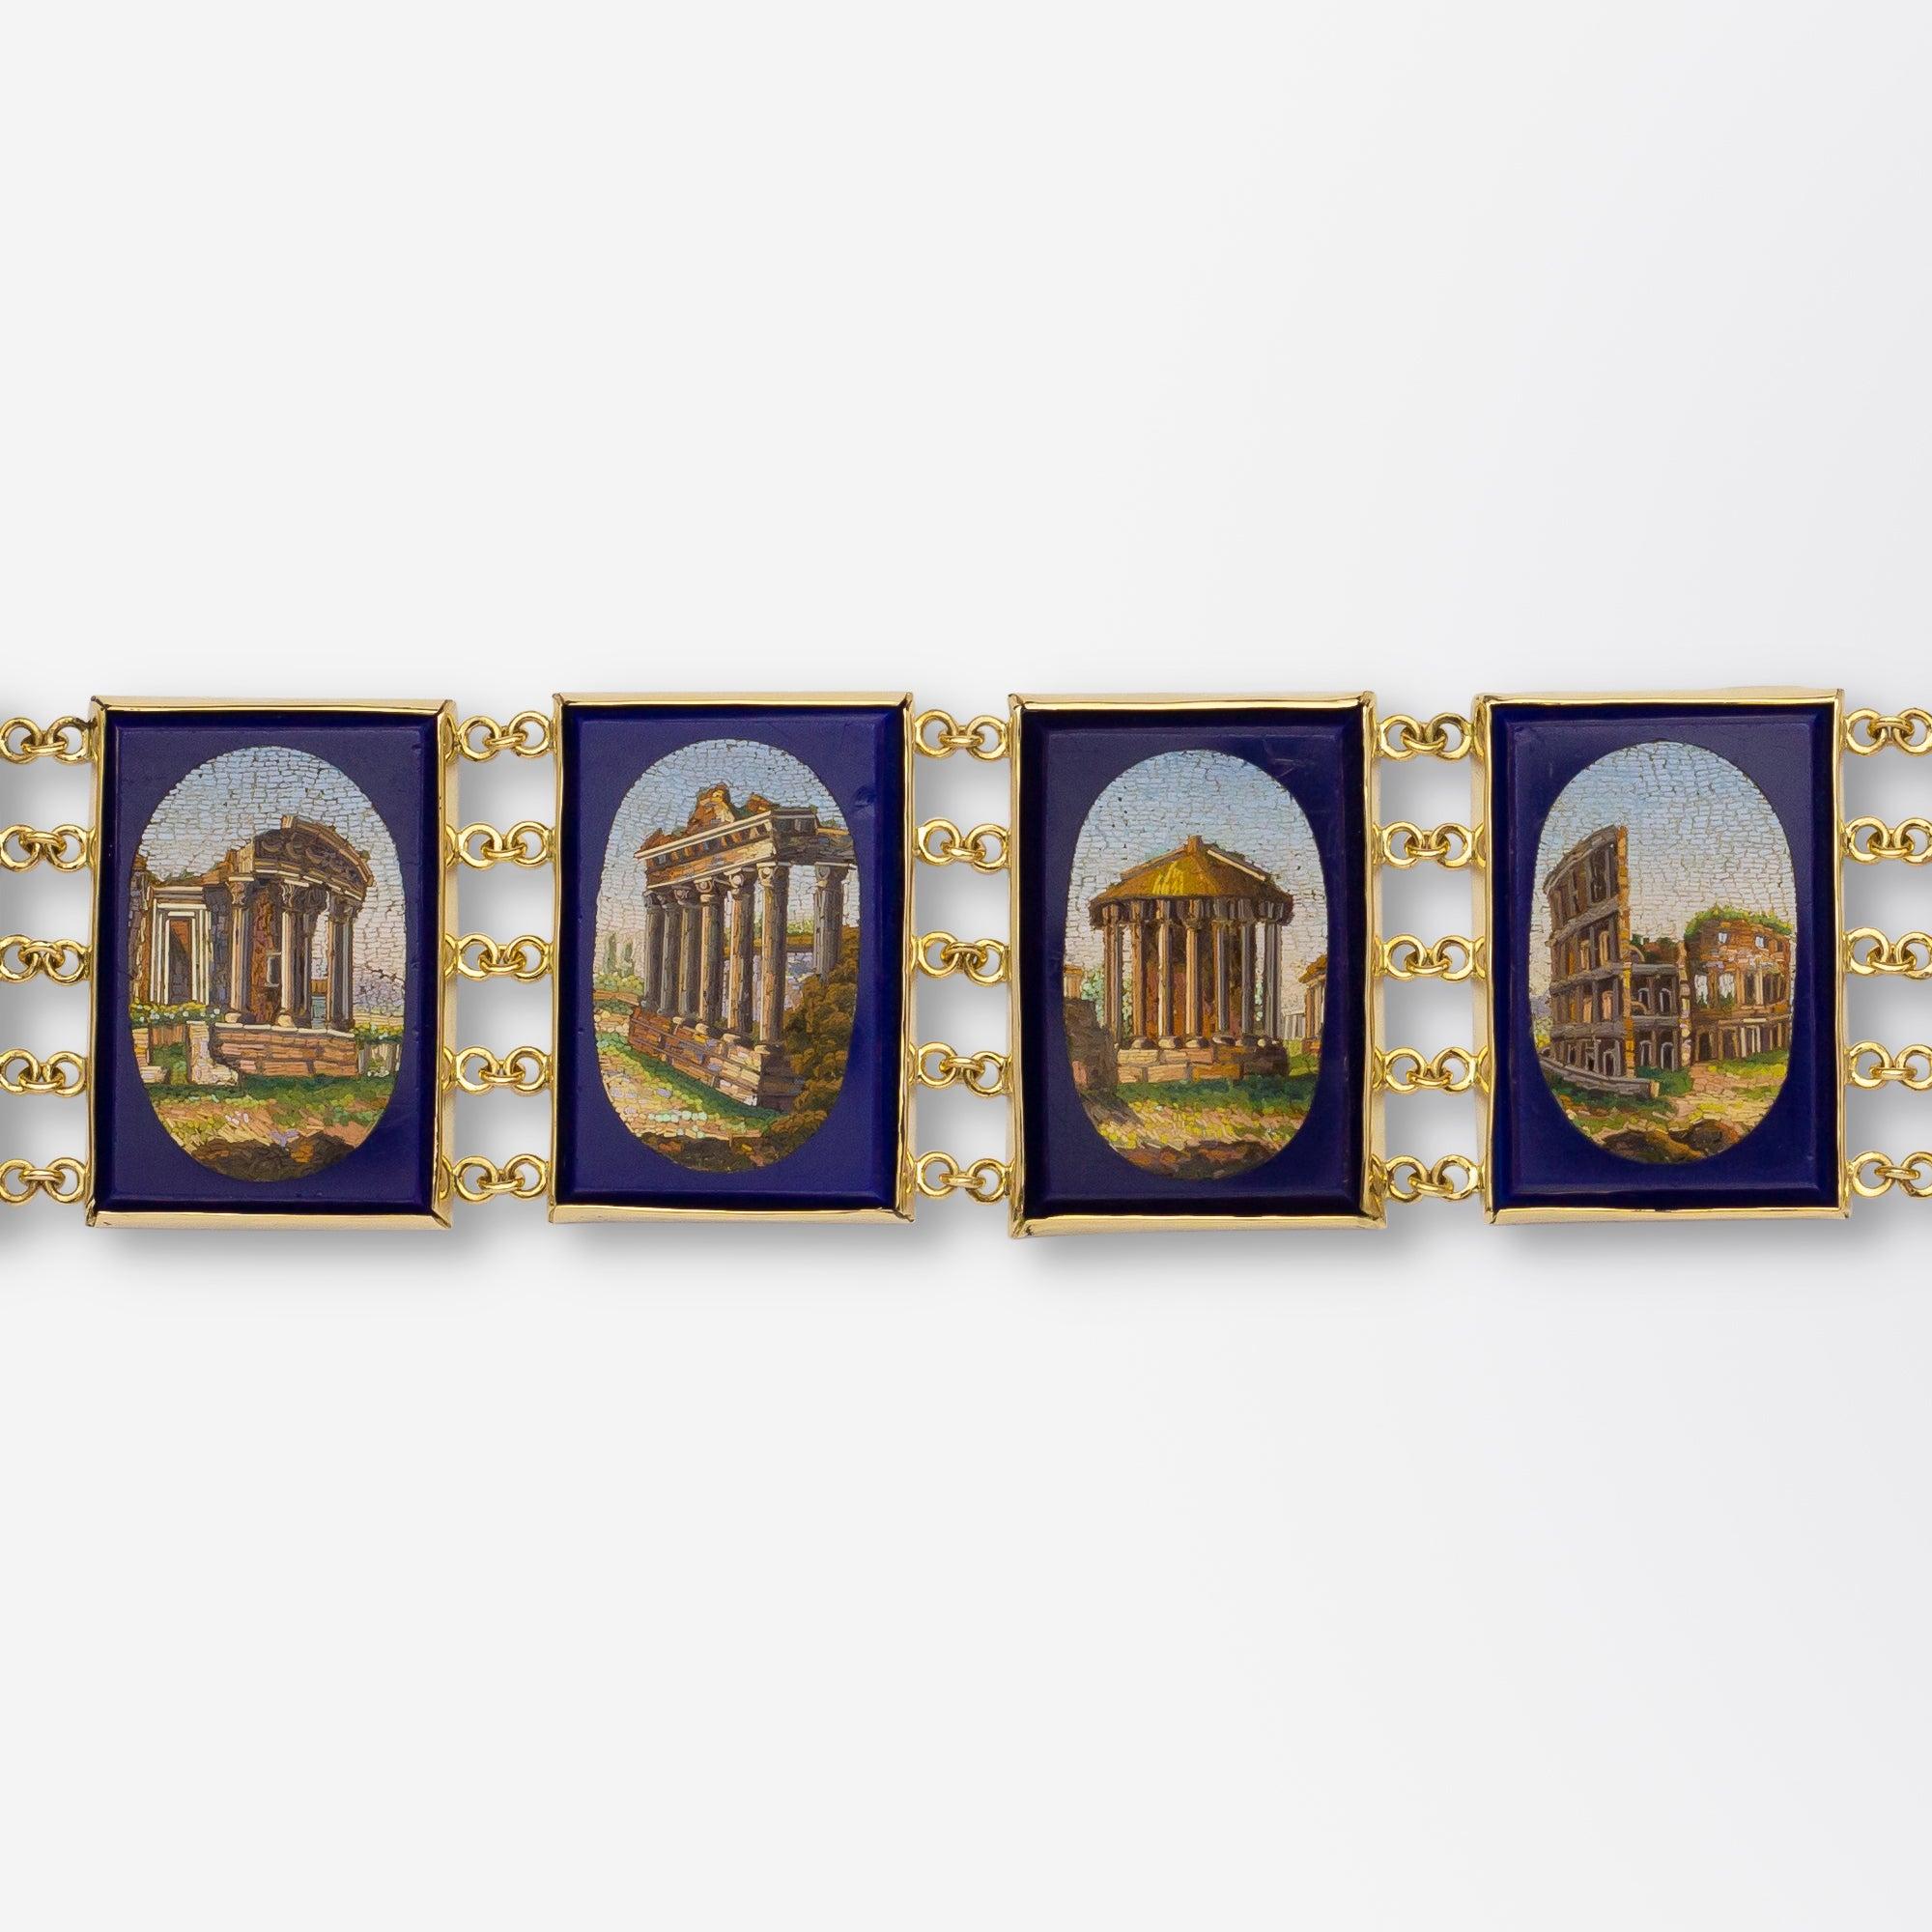 An exceptional 18 karat yellow gold and seven panel micro mosaic bracelet. The bracelet centres around seven cobalt blue glass panels which are inset with micro mosaic depictions of Roman ruins, likely acquired on a 'Grand Tour' in Italy during the